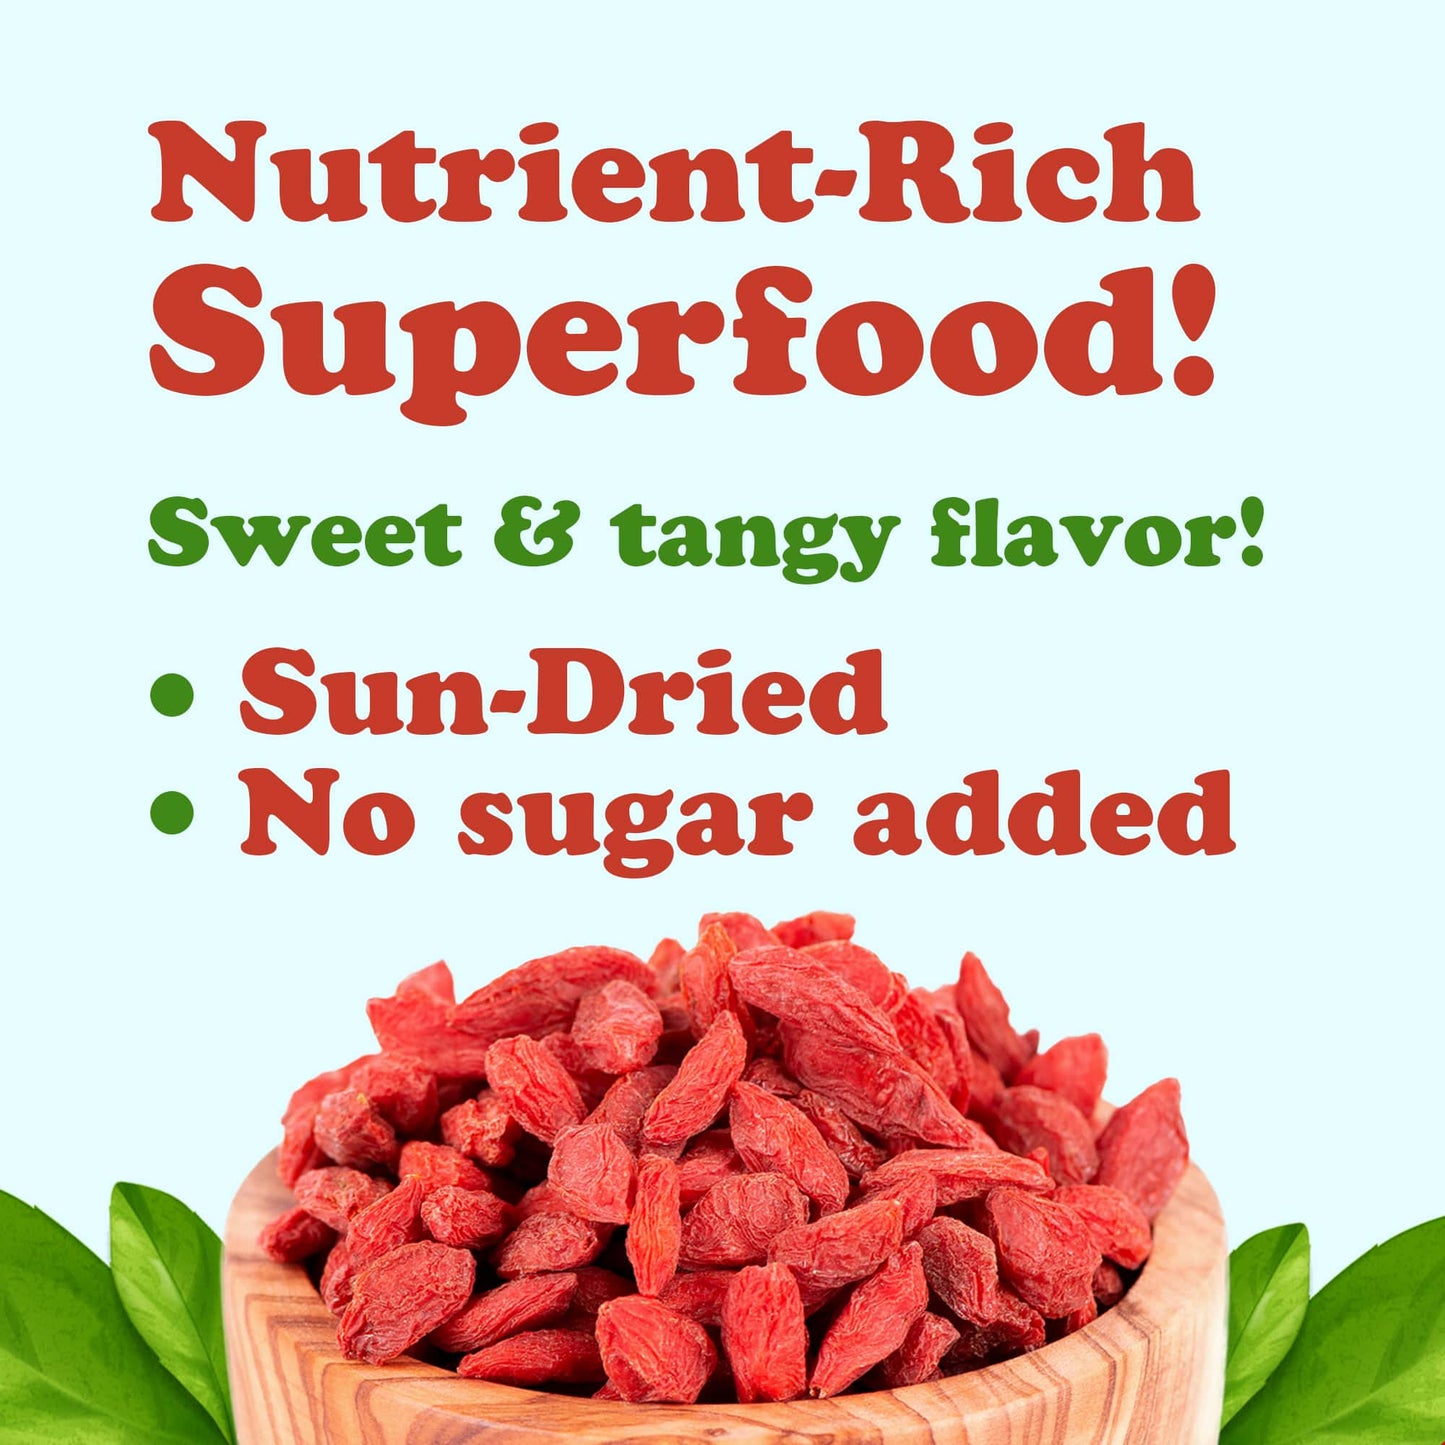 Goji Berries — Sun Dried, Large and Juicy - by Food to Live